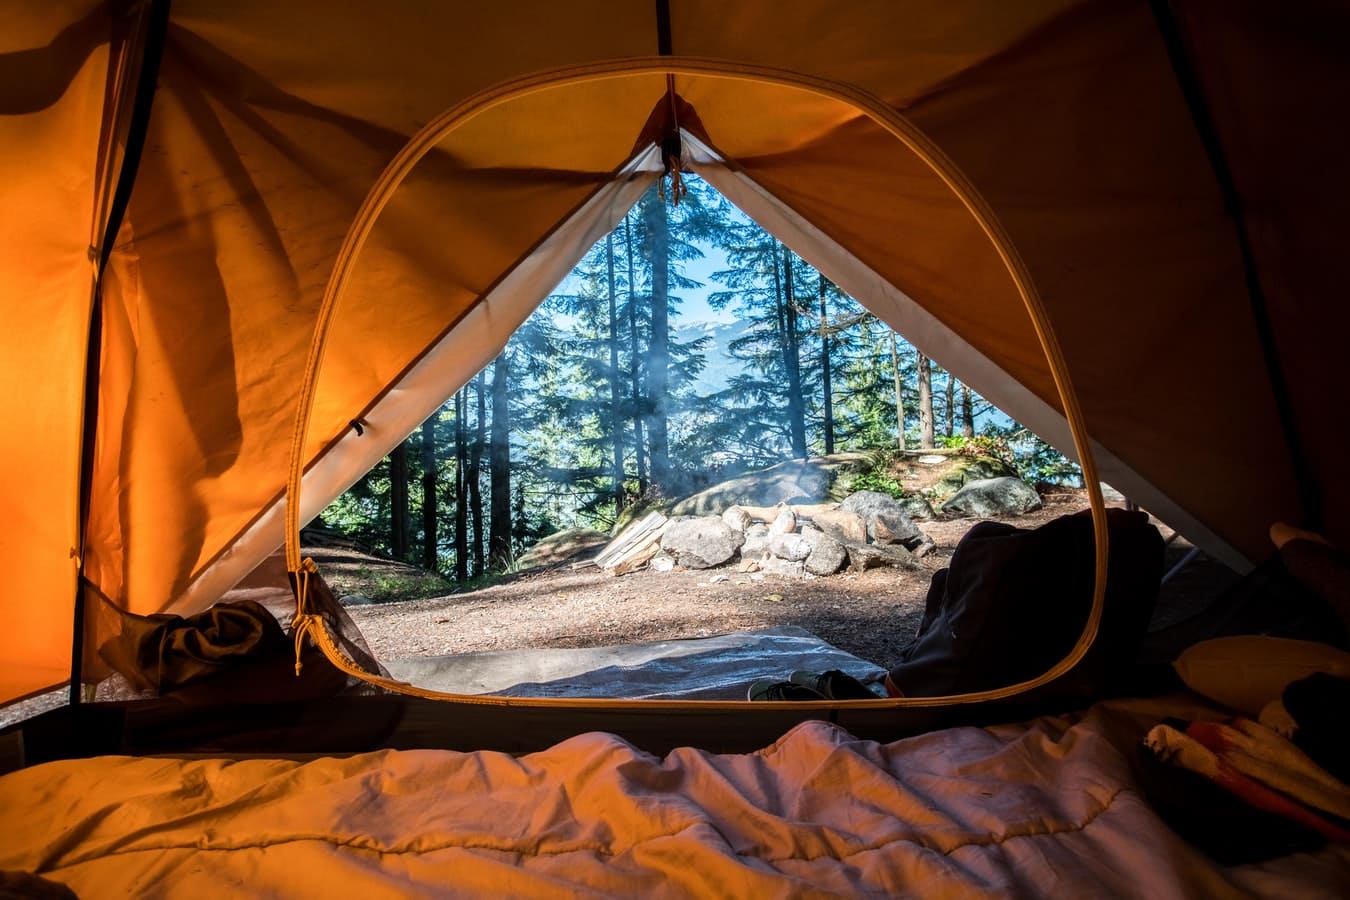 What do you need to prepare for camping in the wild?(I)